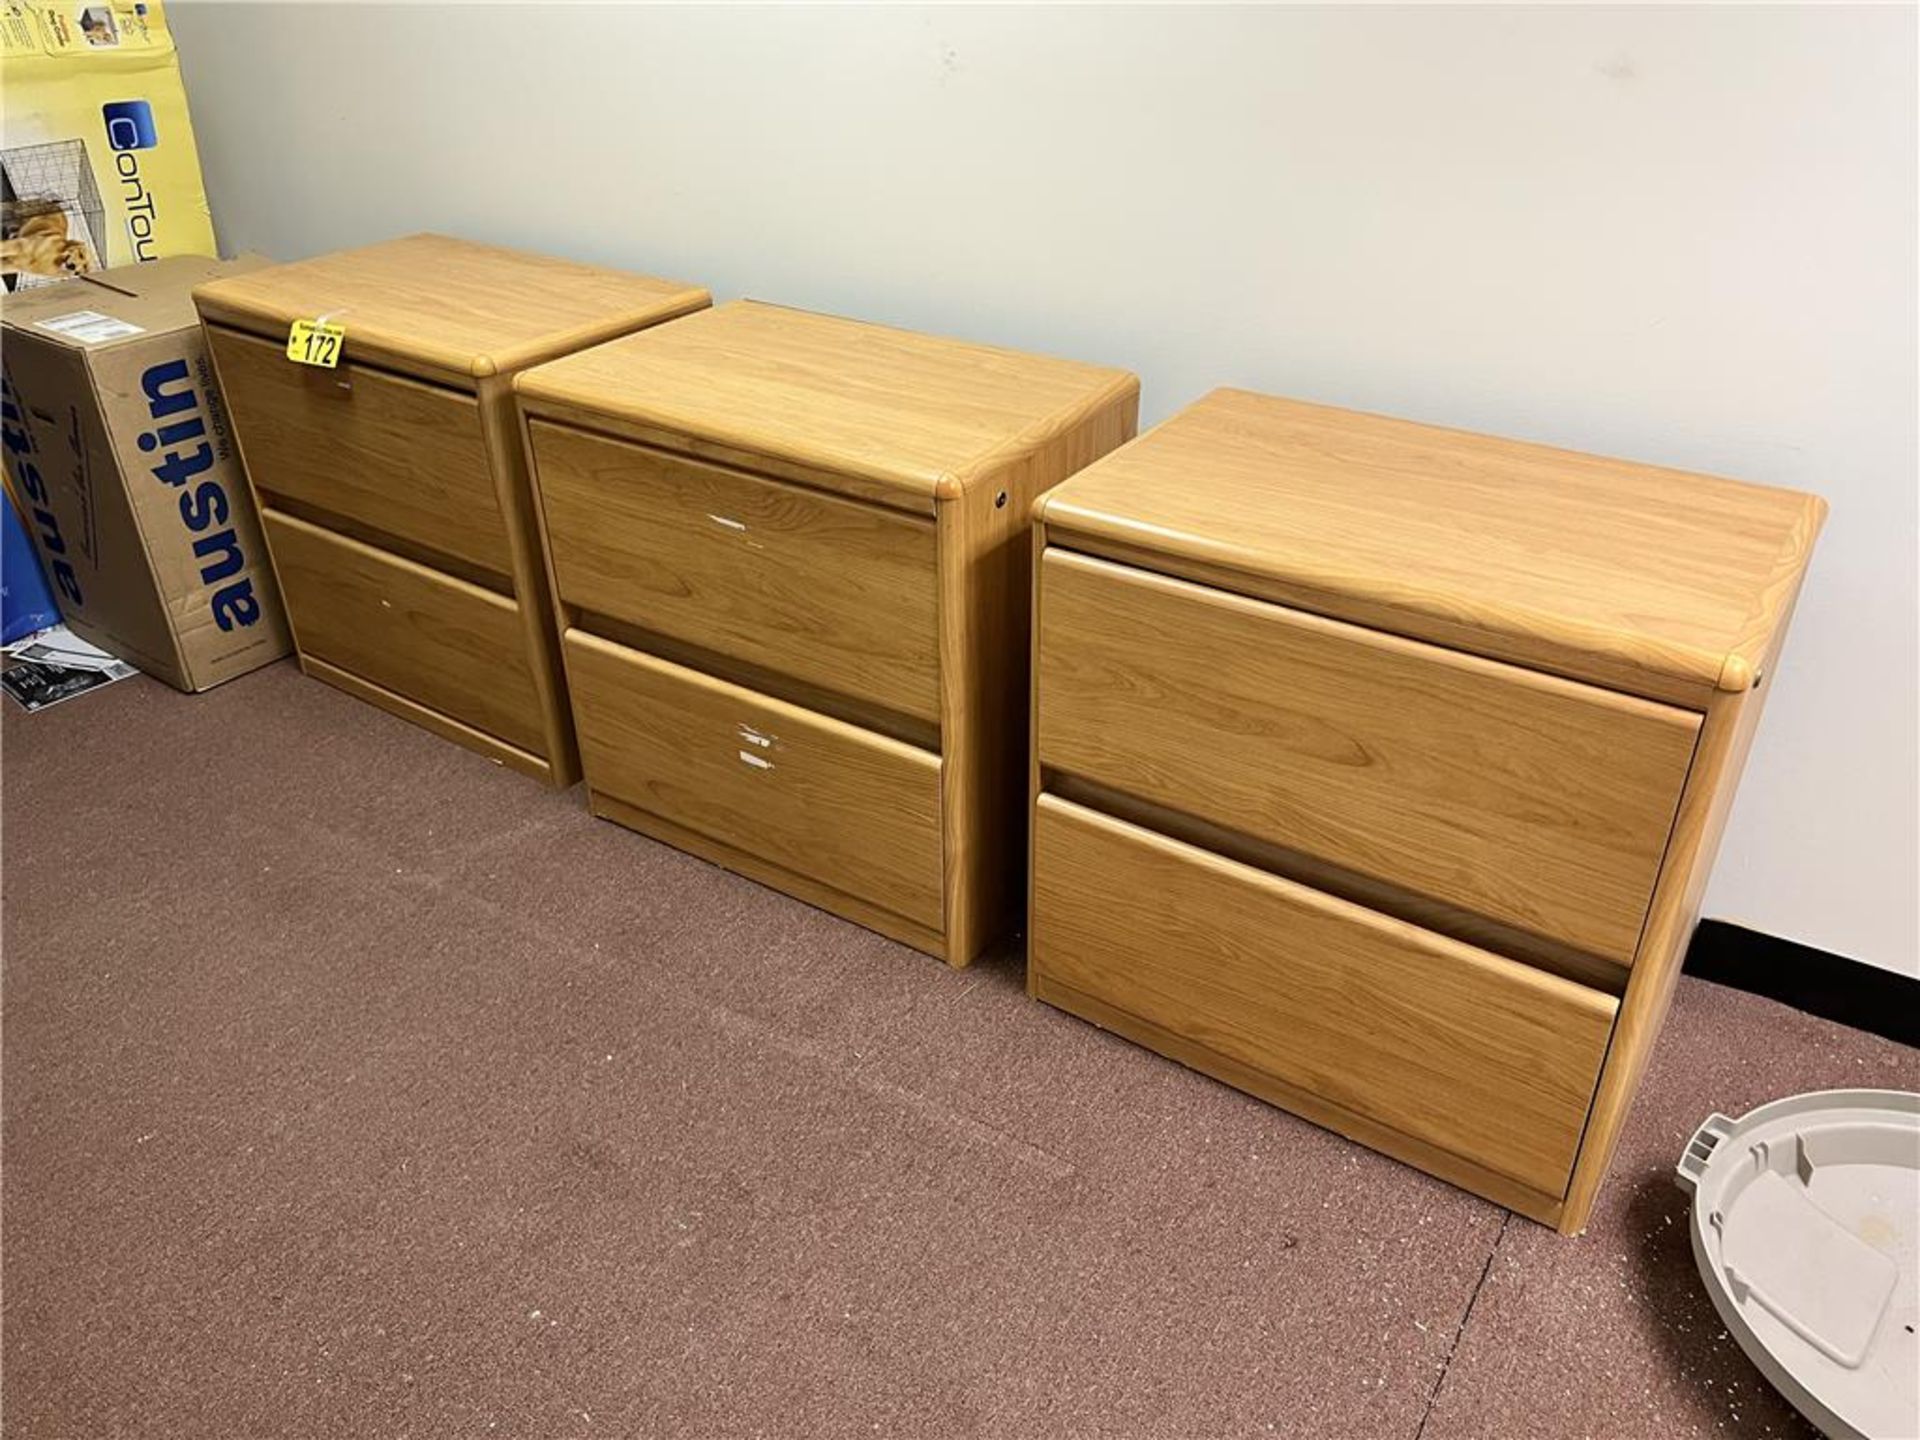 TIMES THE MONEY: (3) WOODEN, LIGHT OAK COLOR, 2-DRAWER LATERAL FILING CABINETS, 31"W X 30"H X 19.5"D